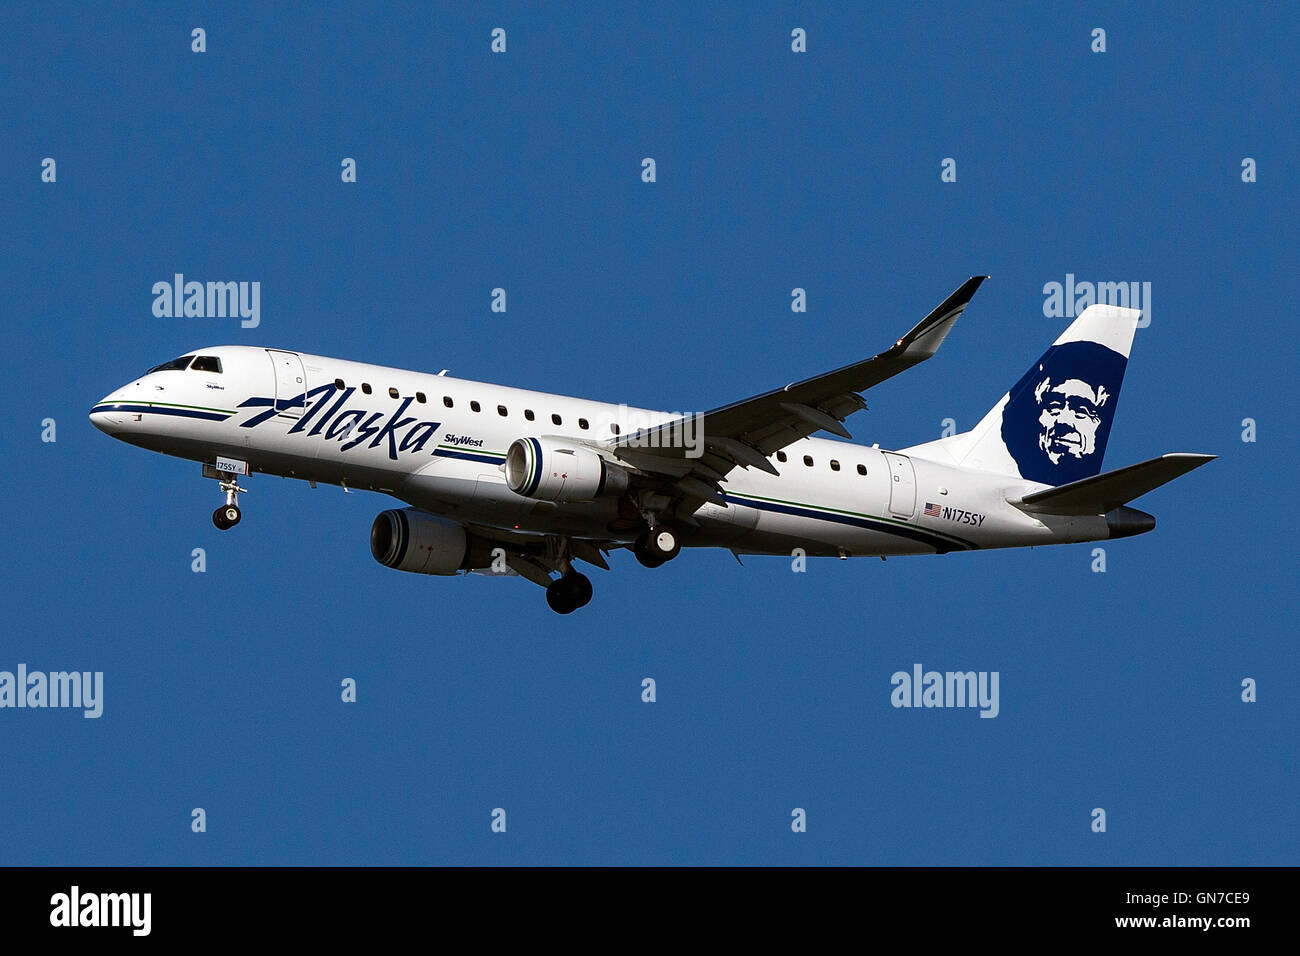 Alaska Airlines Skywest Embraer ERJ170-200LR (registration N175SY) approaches San Francisco International Airport (SFO) over San Mateo, California, United States of America Stock Photo